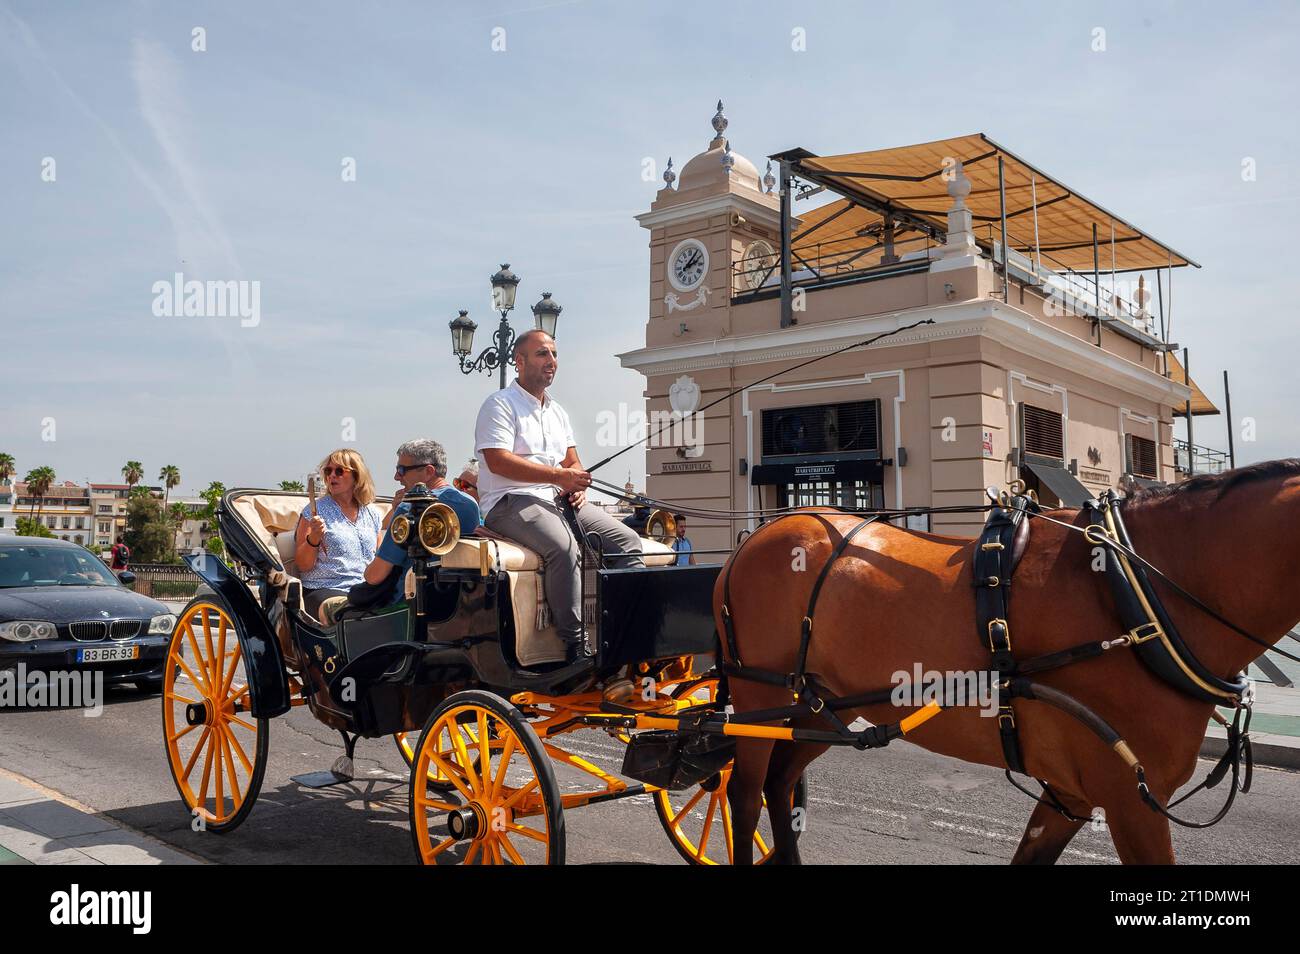 Seville, Spain, Small Group of People, Tourists, Visiting Old City 'Santa Cruz' Neighborhood,in Horse and Buggy Street Scene Stock Photo